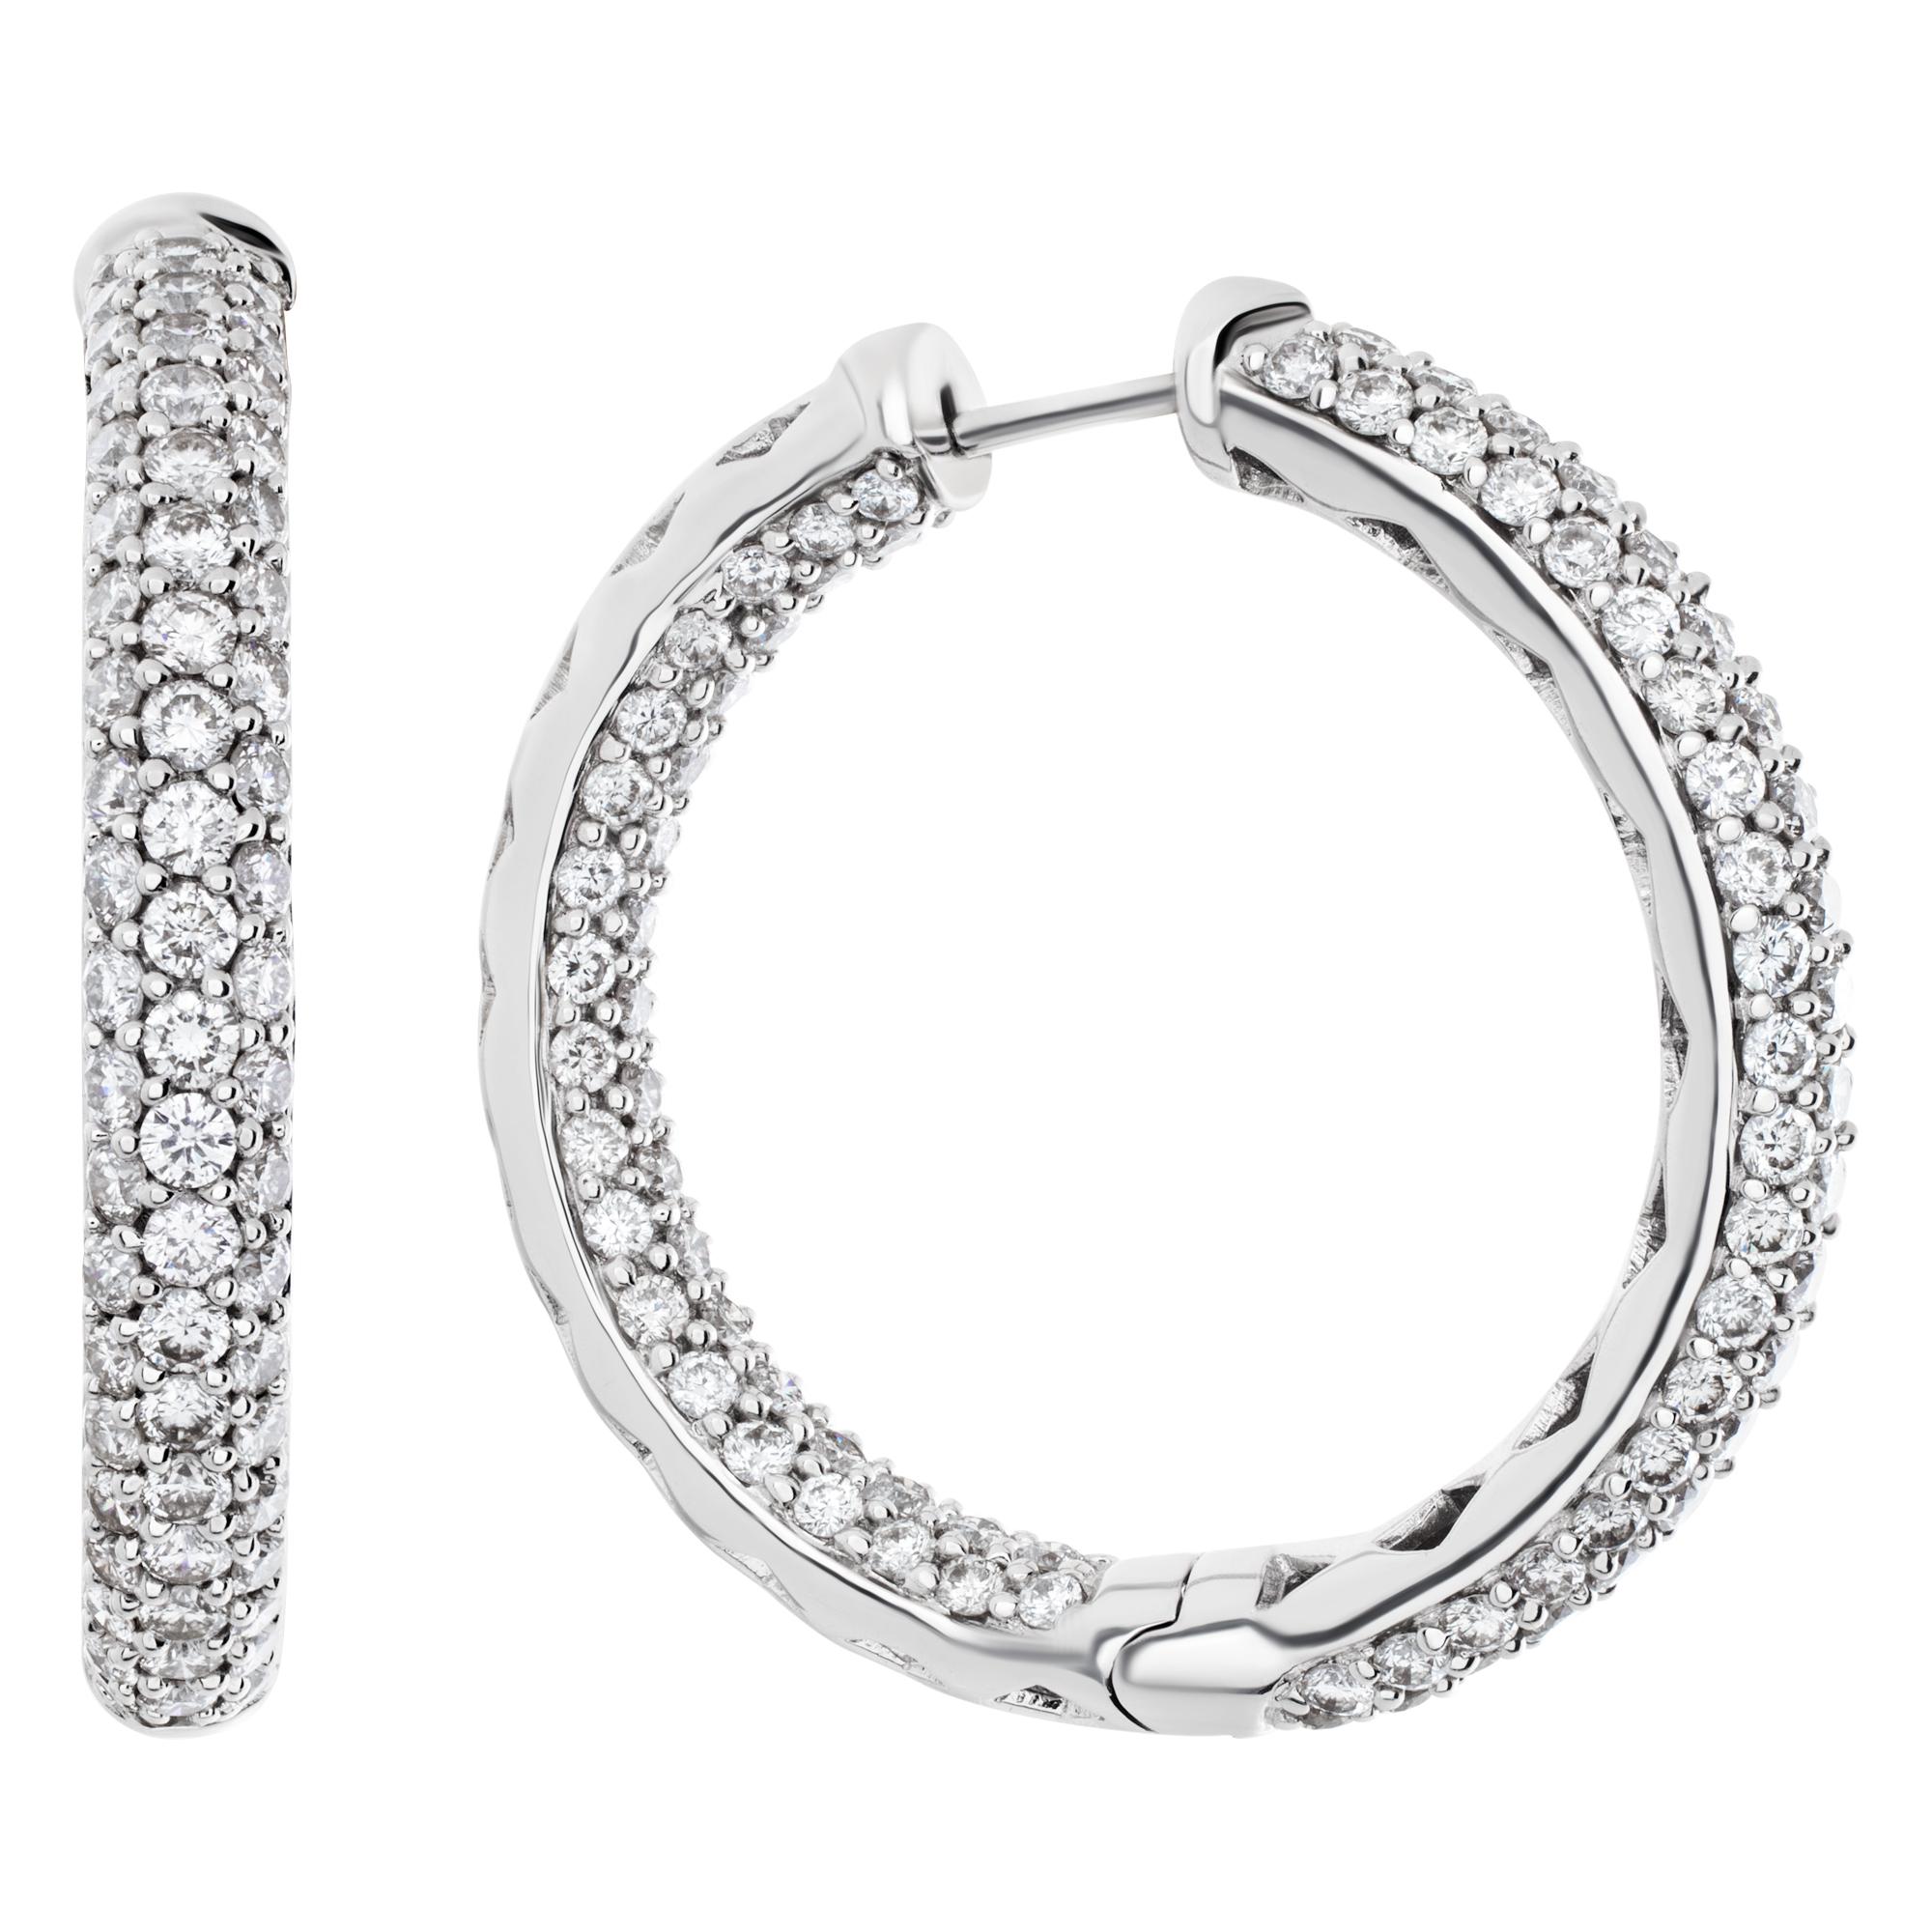 Diamond hoop earrings in 18k white gold with approximately 3.50 carats of estimated G-H color and SI1 clarity diamonds. 32 mm diameter with secure post closure.